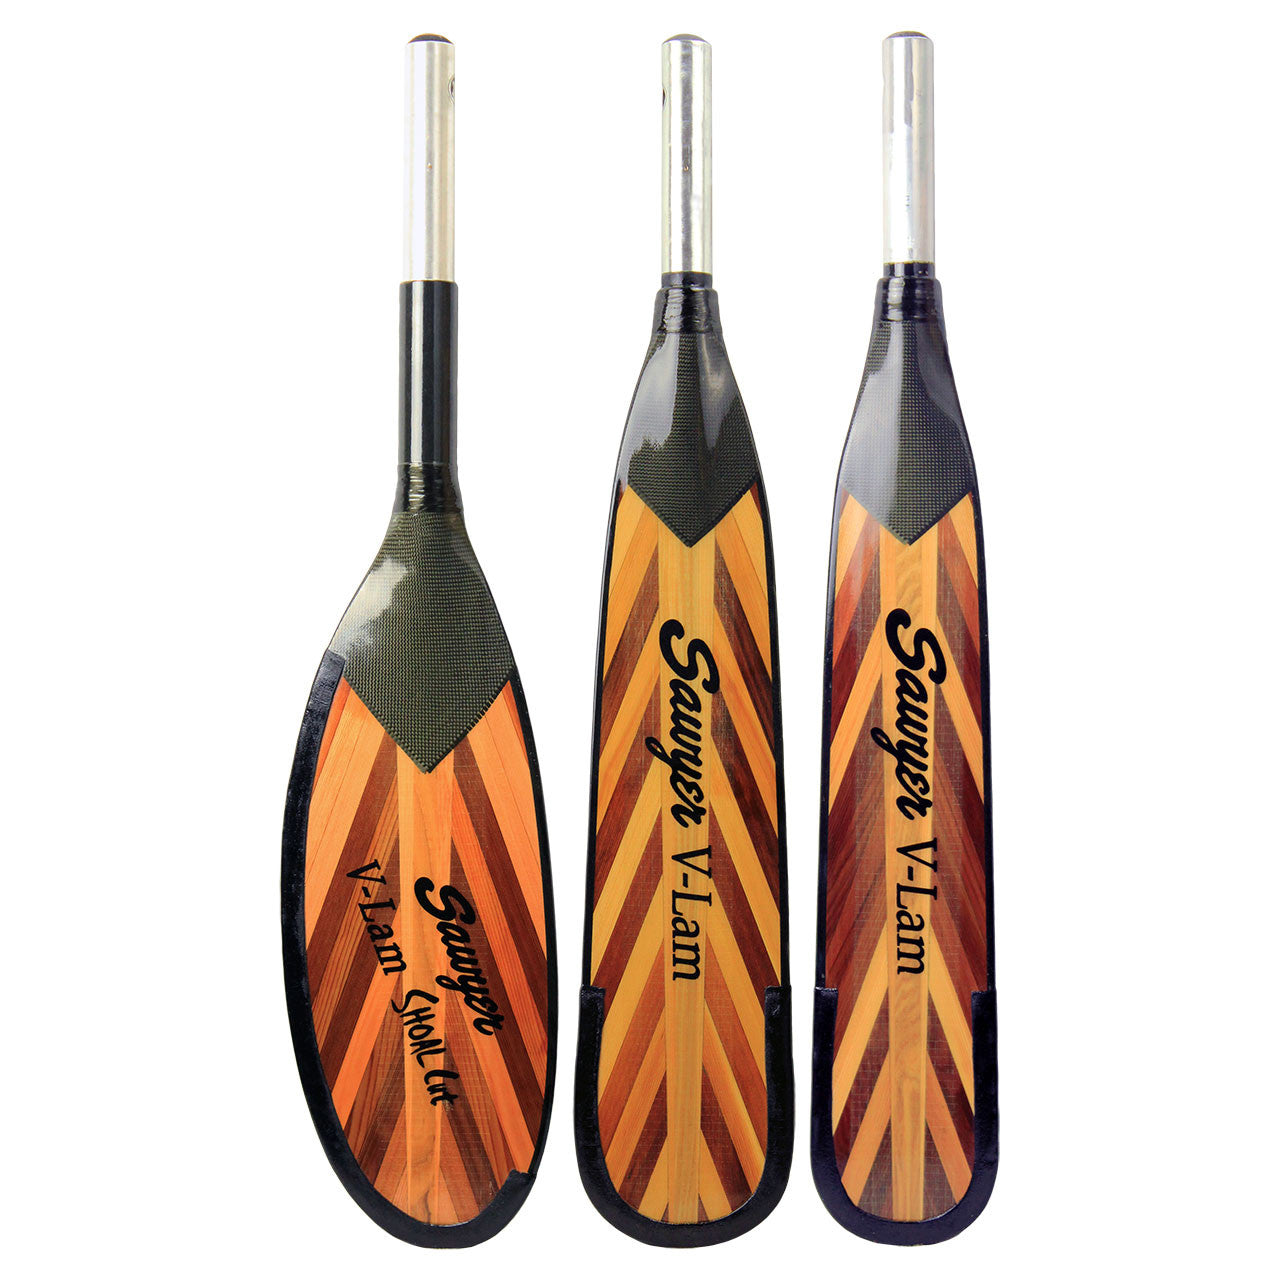 Three V-Lam Fir Oar Blade paddles with different designs, featuring fiberglass reinforcement for a light and tough construction by Sawyer.